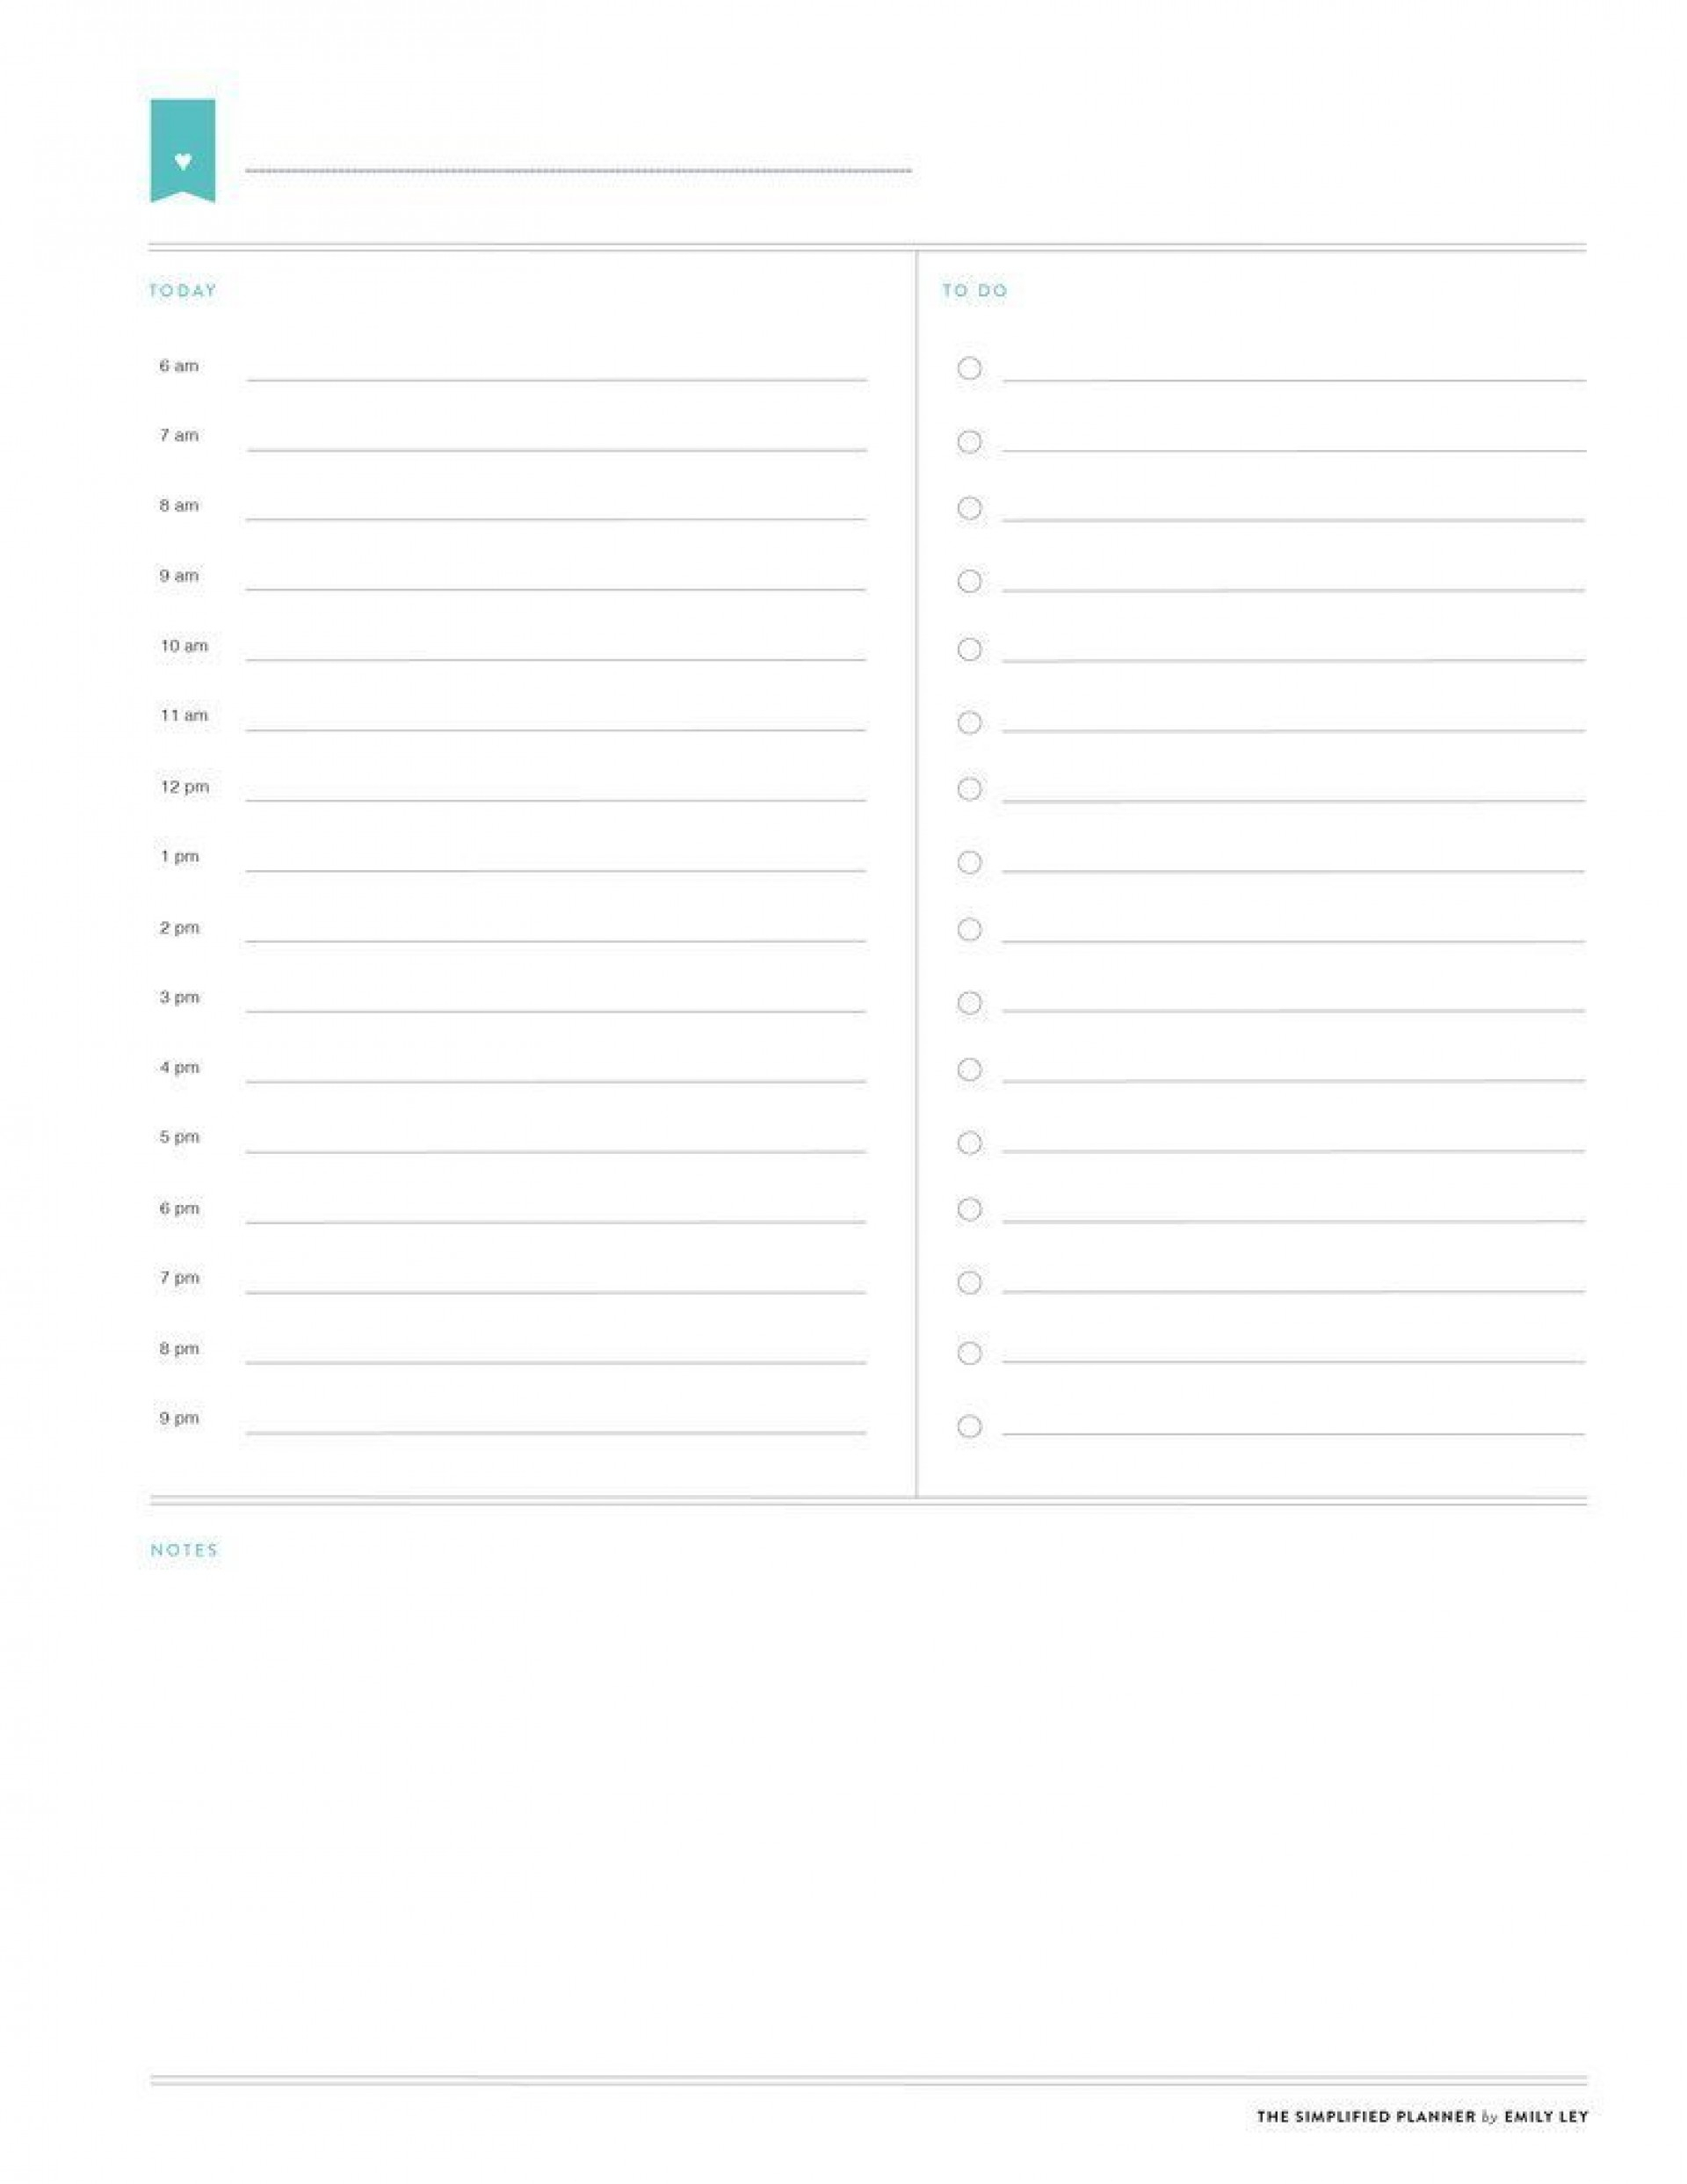 025 Daily Routine Chart Templateas Free Printable Schedule pertaining to Daily Planner With Time Slots Printable